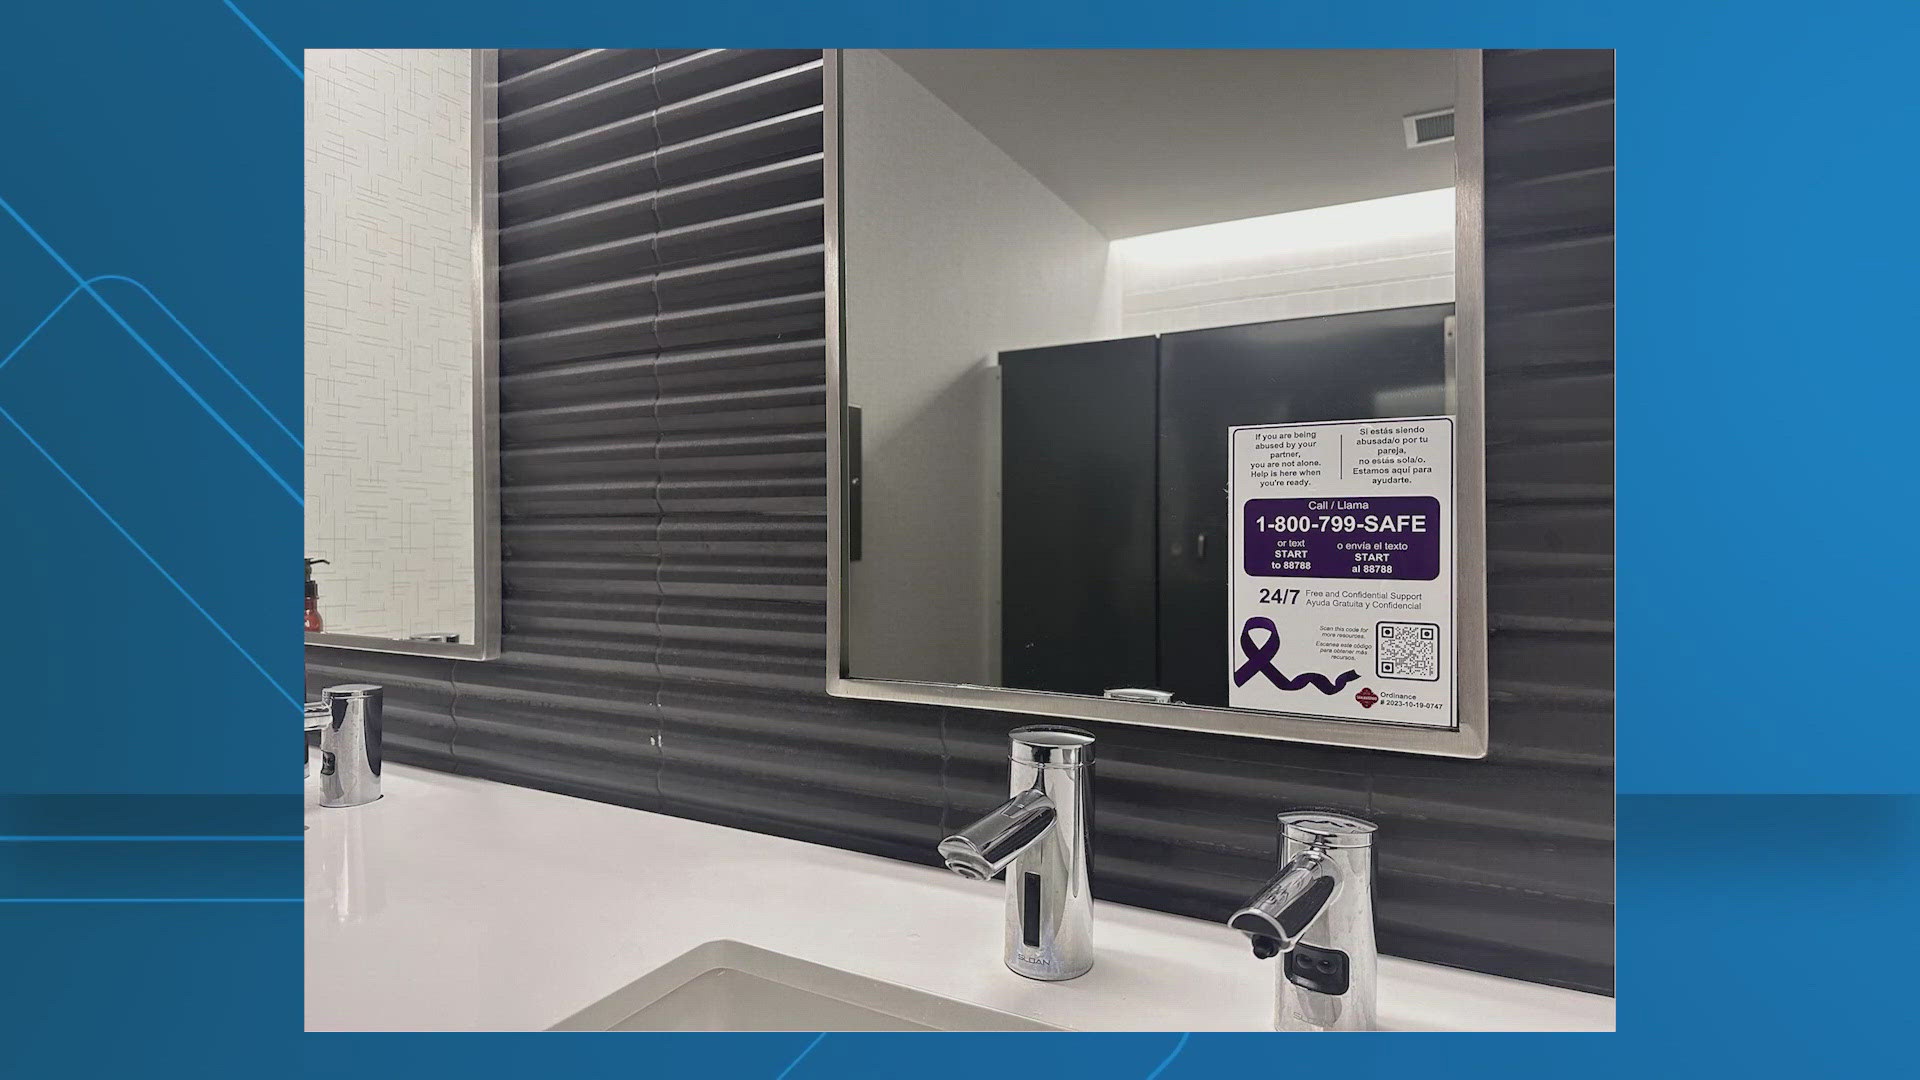 Starting this fall, signs must go up in public restrooms with resources for domestic violence.